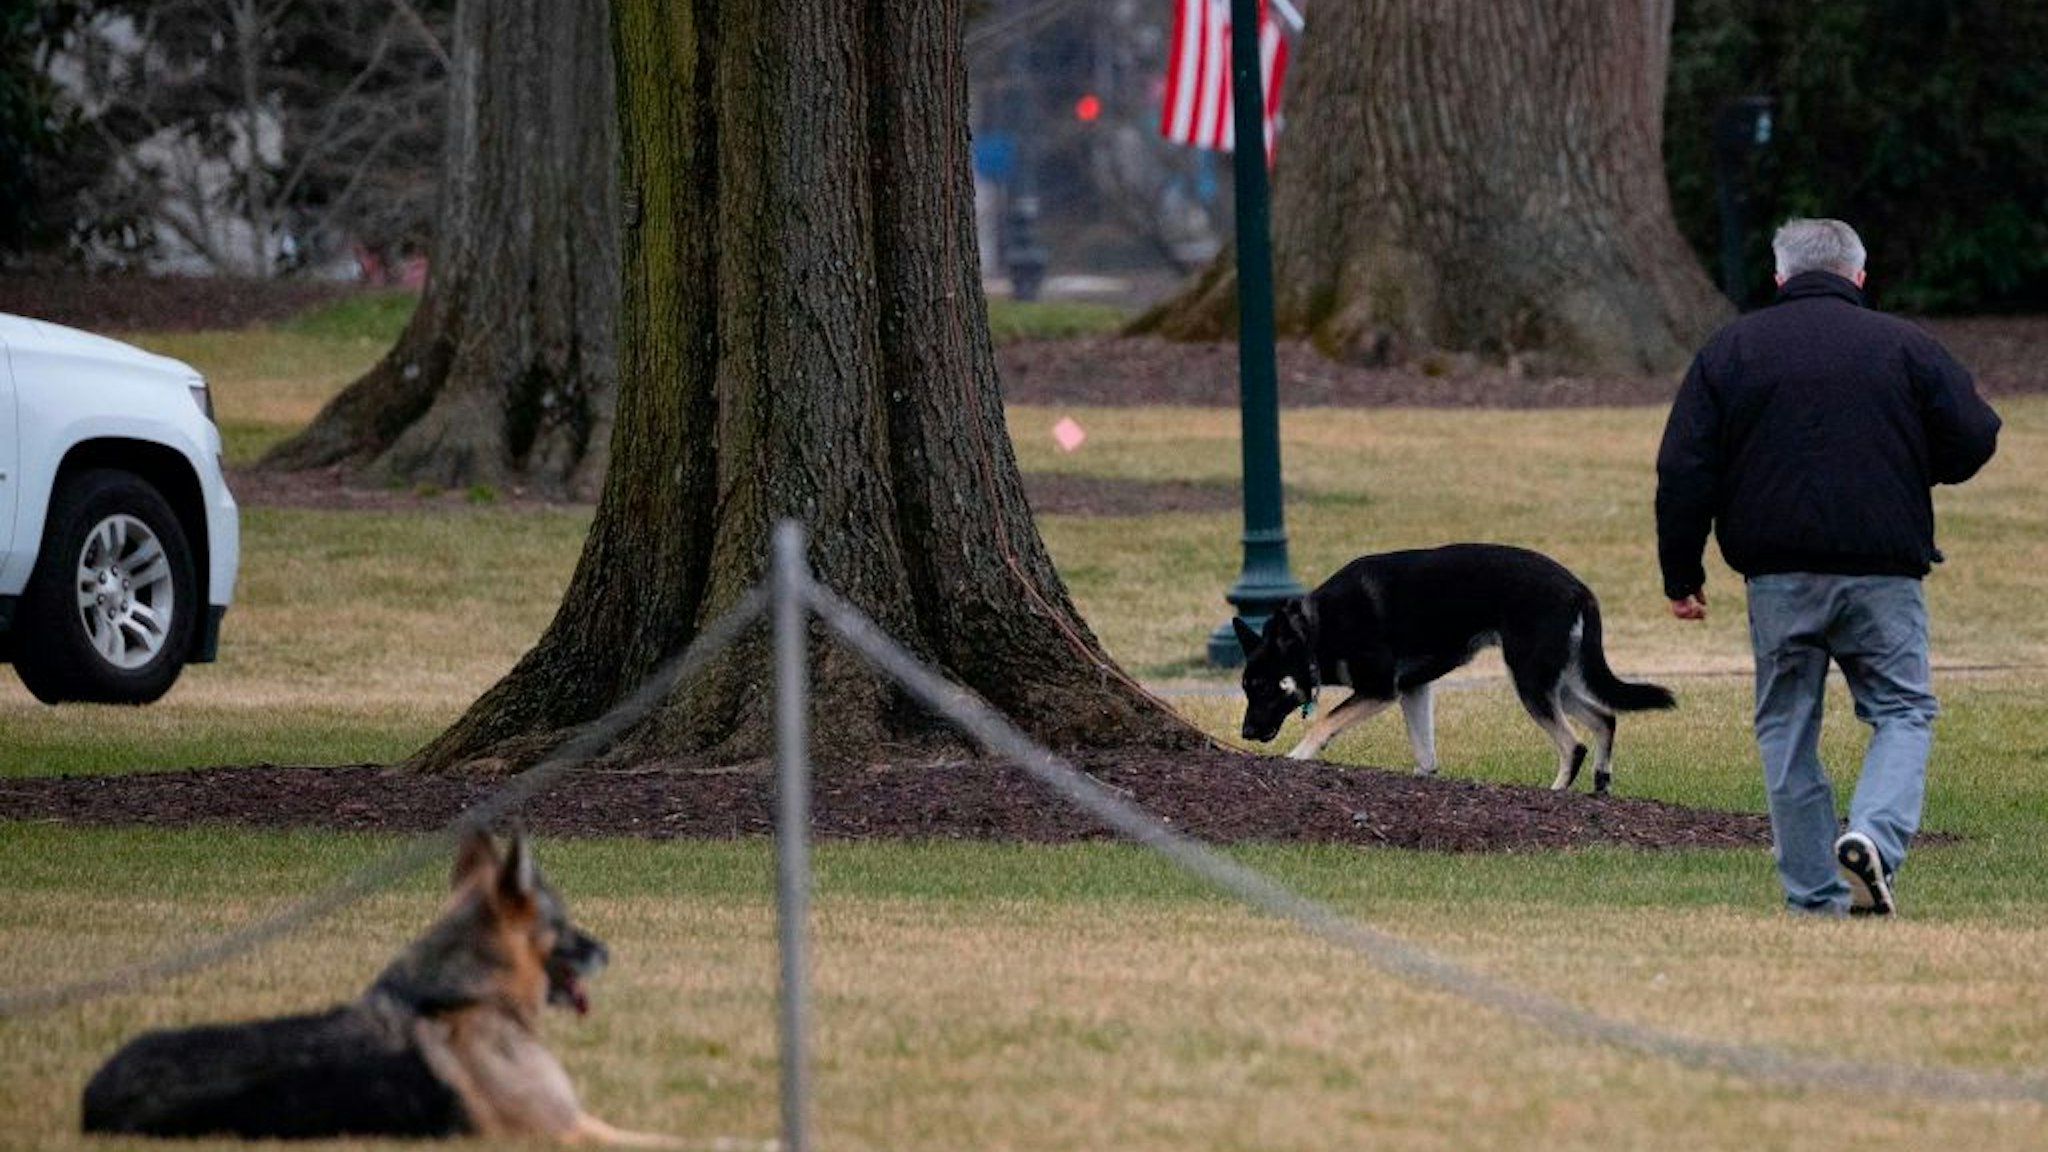 First dogs Champ and Major Biden are seen on the South Lawn of the White House in Washington, DC, on January 25, 2021. - Joe Biden's dogs Champ and Major have moved into the White House, reviving a long-standing tradition of presidential pets that was broken under Donald Trump. The pooches can be seen trotting on the White House grounds in pictures retweeted by First Lady Jill Biden's spokesman Michael LaRosa, with the pointed obelisk of the Washington Monument in the background."Champ is enjoying his new dog bed by the fireplace, and Major loved running around on the South Lawn," LaRosa told CNN in a statement on January 25, 2021.